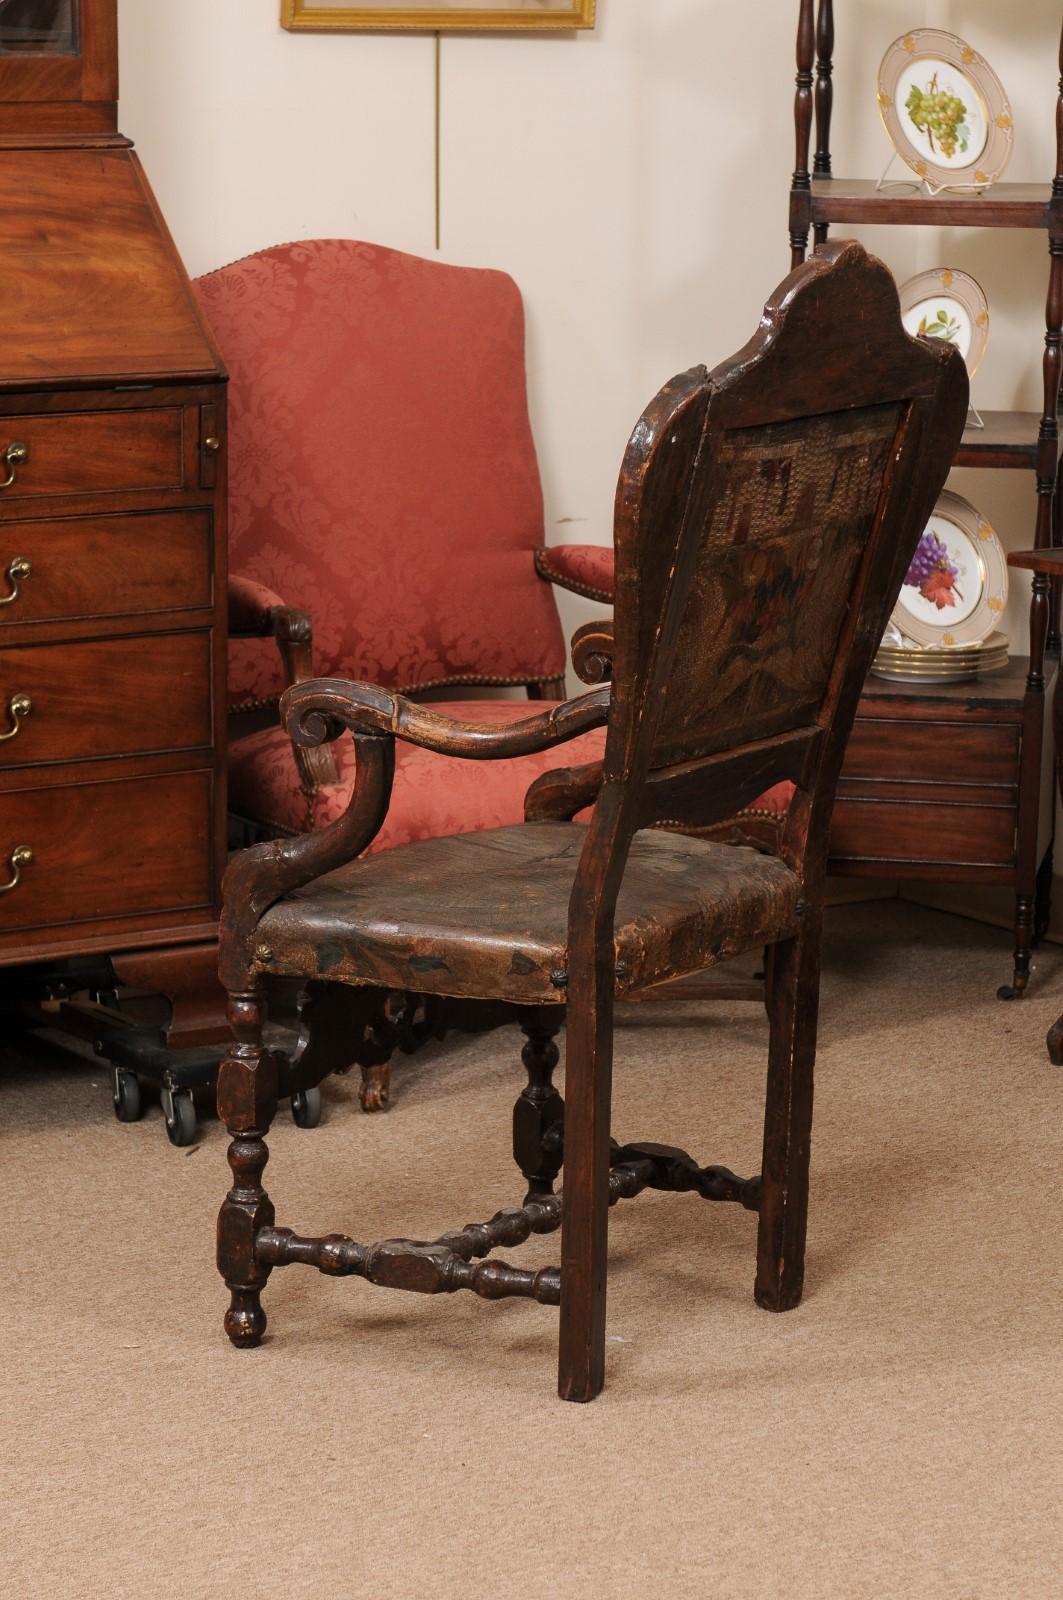 Early 18th Century Italian Venetian Walnut Armchair with Embossed Leather Upholstery